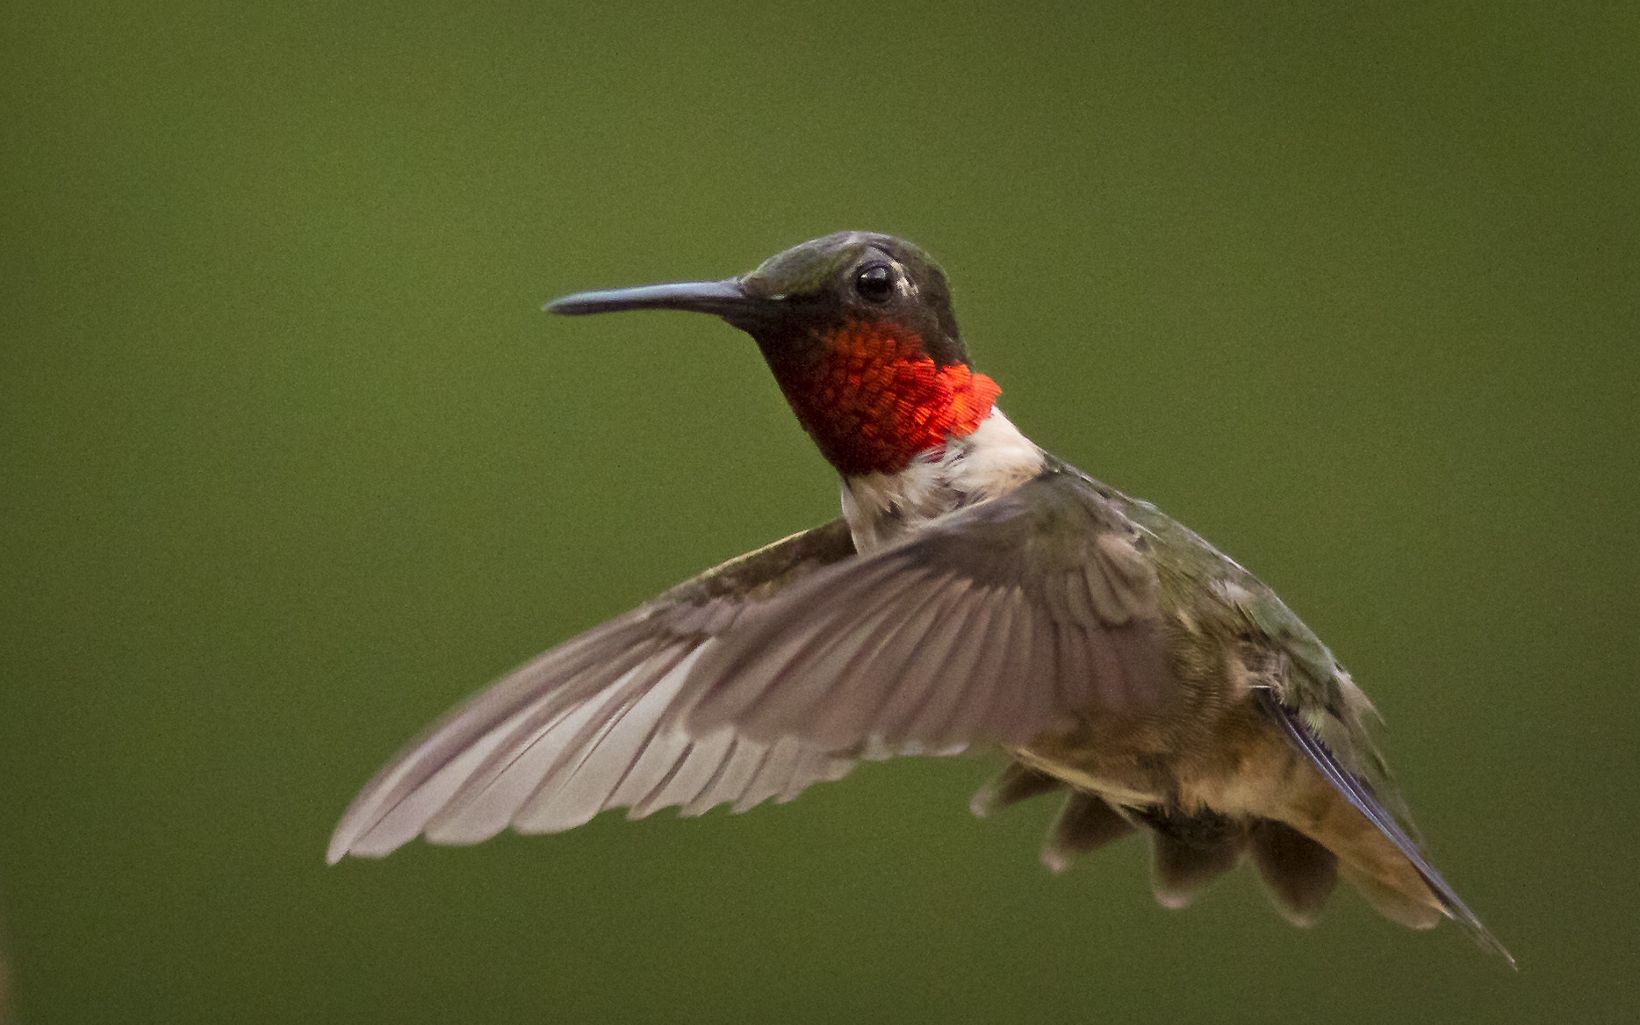 Ruby-throated hummingbird Plant red, orange and purple tubular flowers such as columbine, cardinal flower and wild bergamot to attract the lovely ruby-throated hummingbird. © Kent Mason